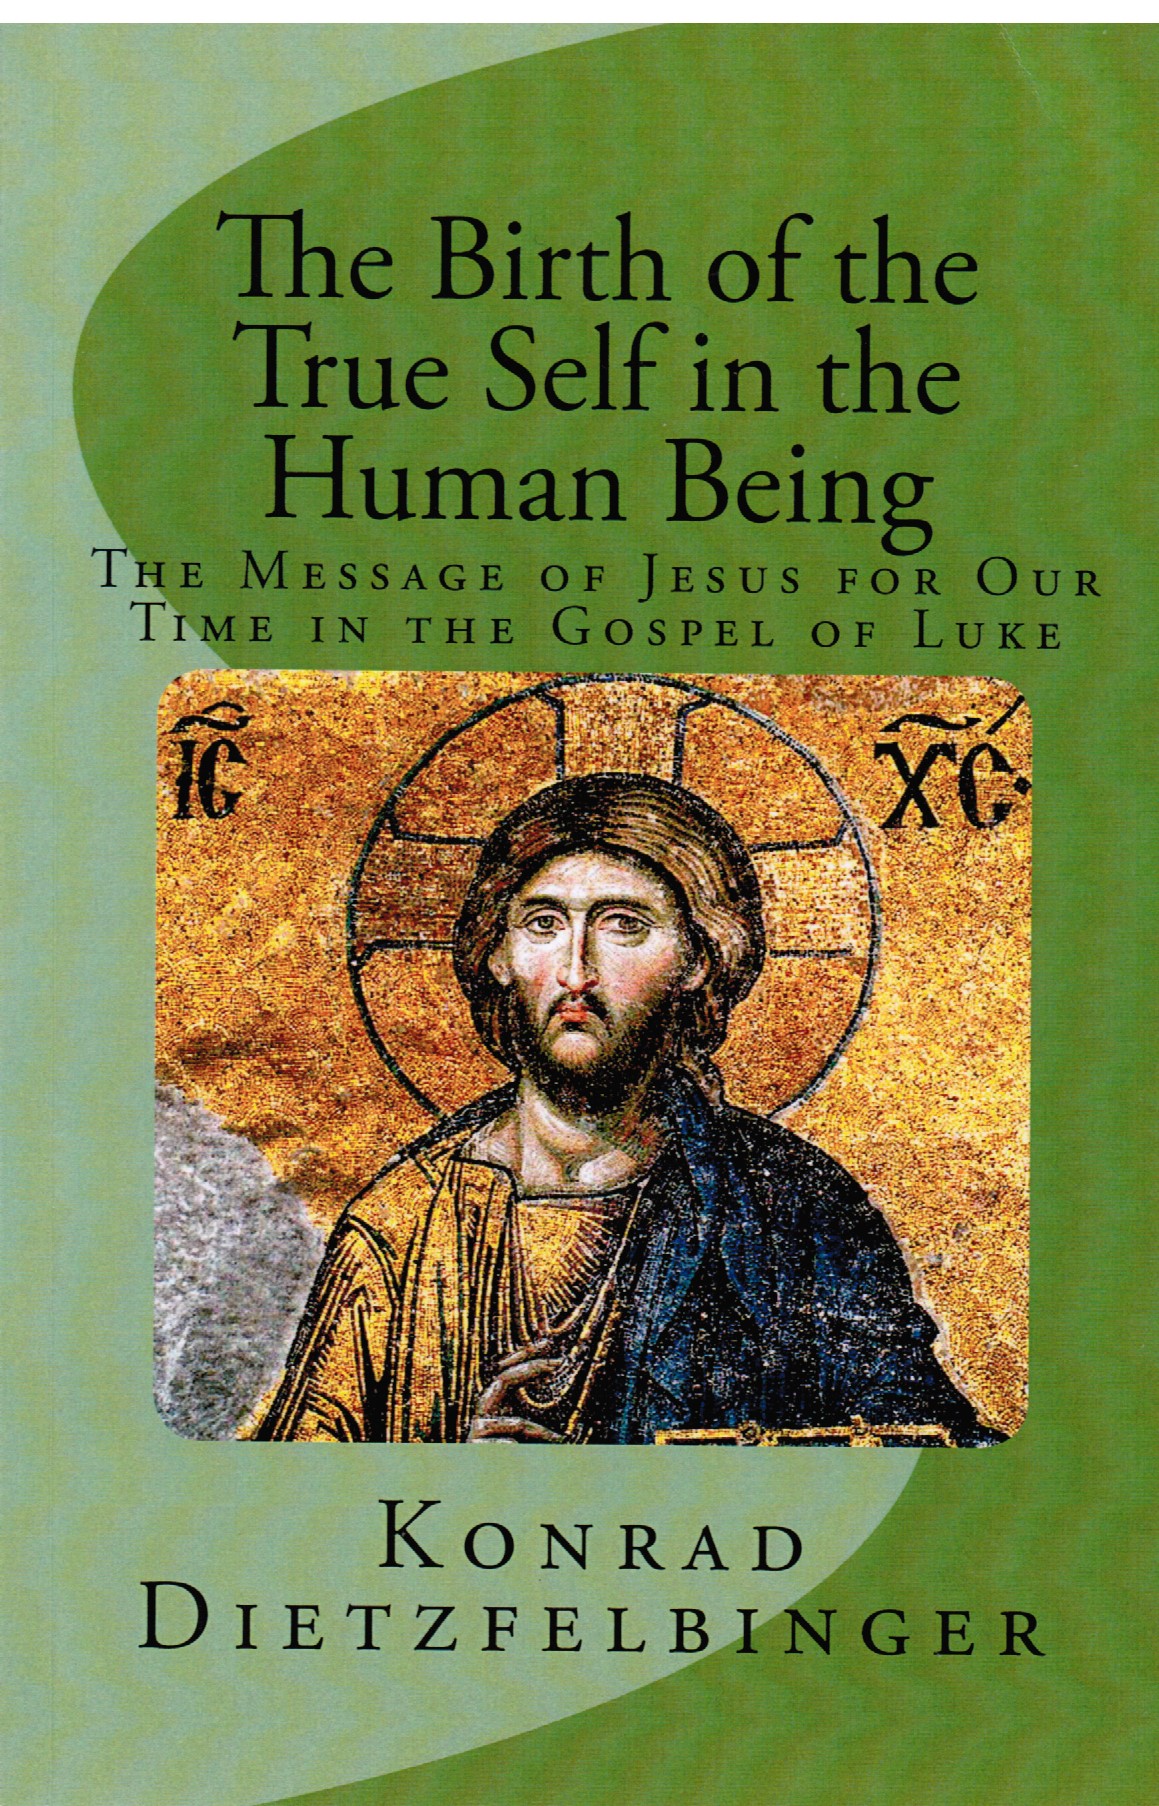 The Birth of the True Self in the Human Being (Engl.) (Part 1)